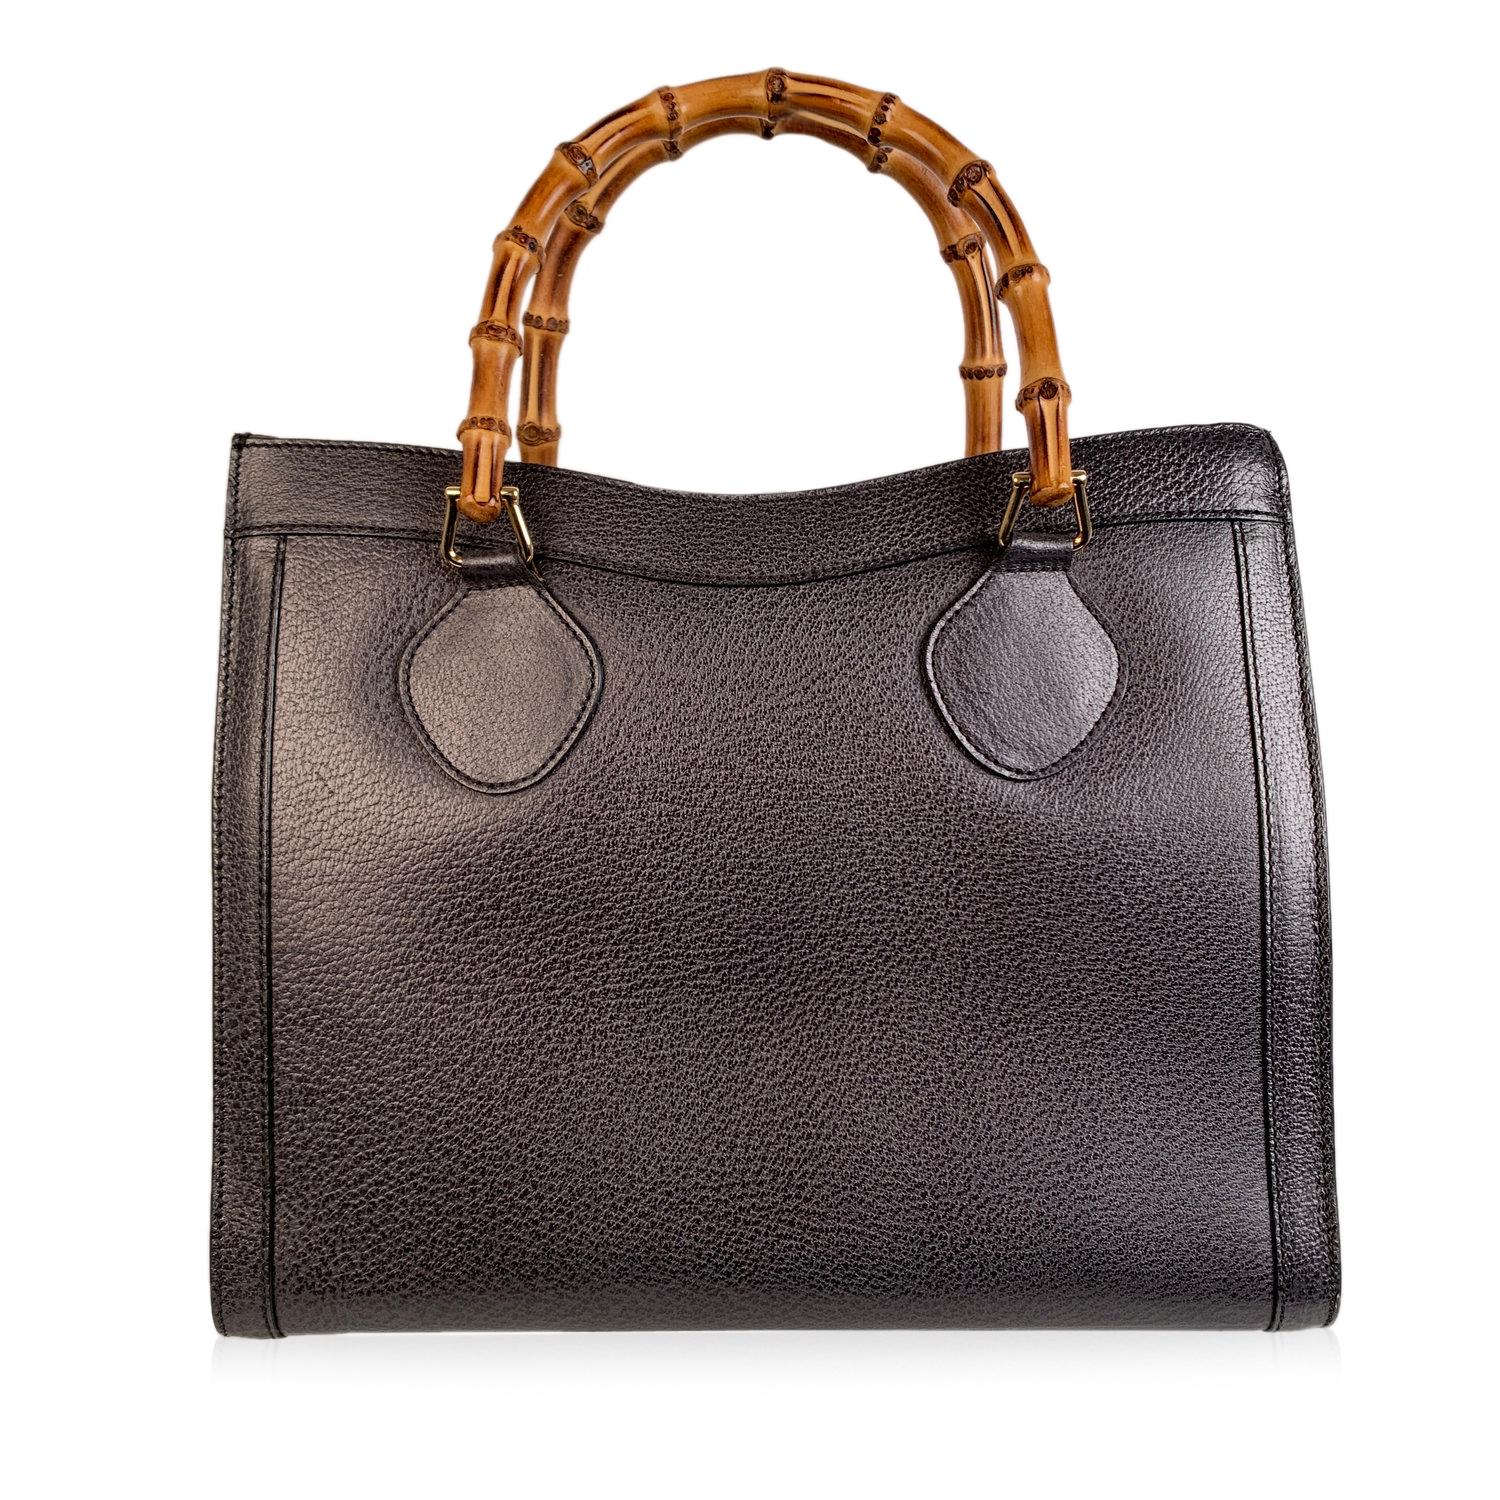 Beautiful Gucci Bamboo tote bag in gray genuine leather. Double distinctive Bamboo handle. Princess Diana, was snapped carrying a this model on several occasions. Magnetic button closure on top. Gray suede lining. 5 bottom feet. Gold metal harwdare.